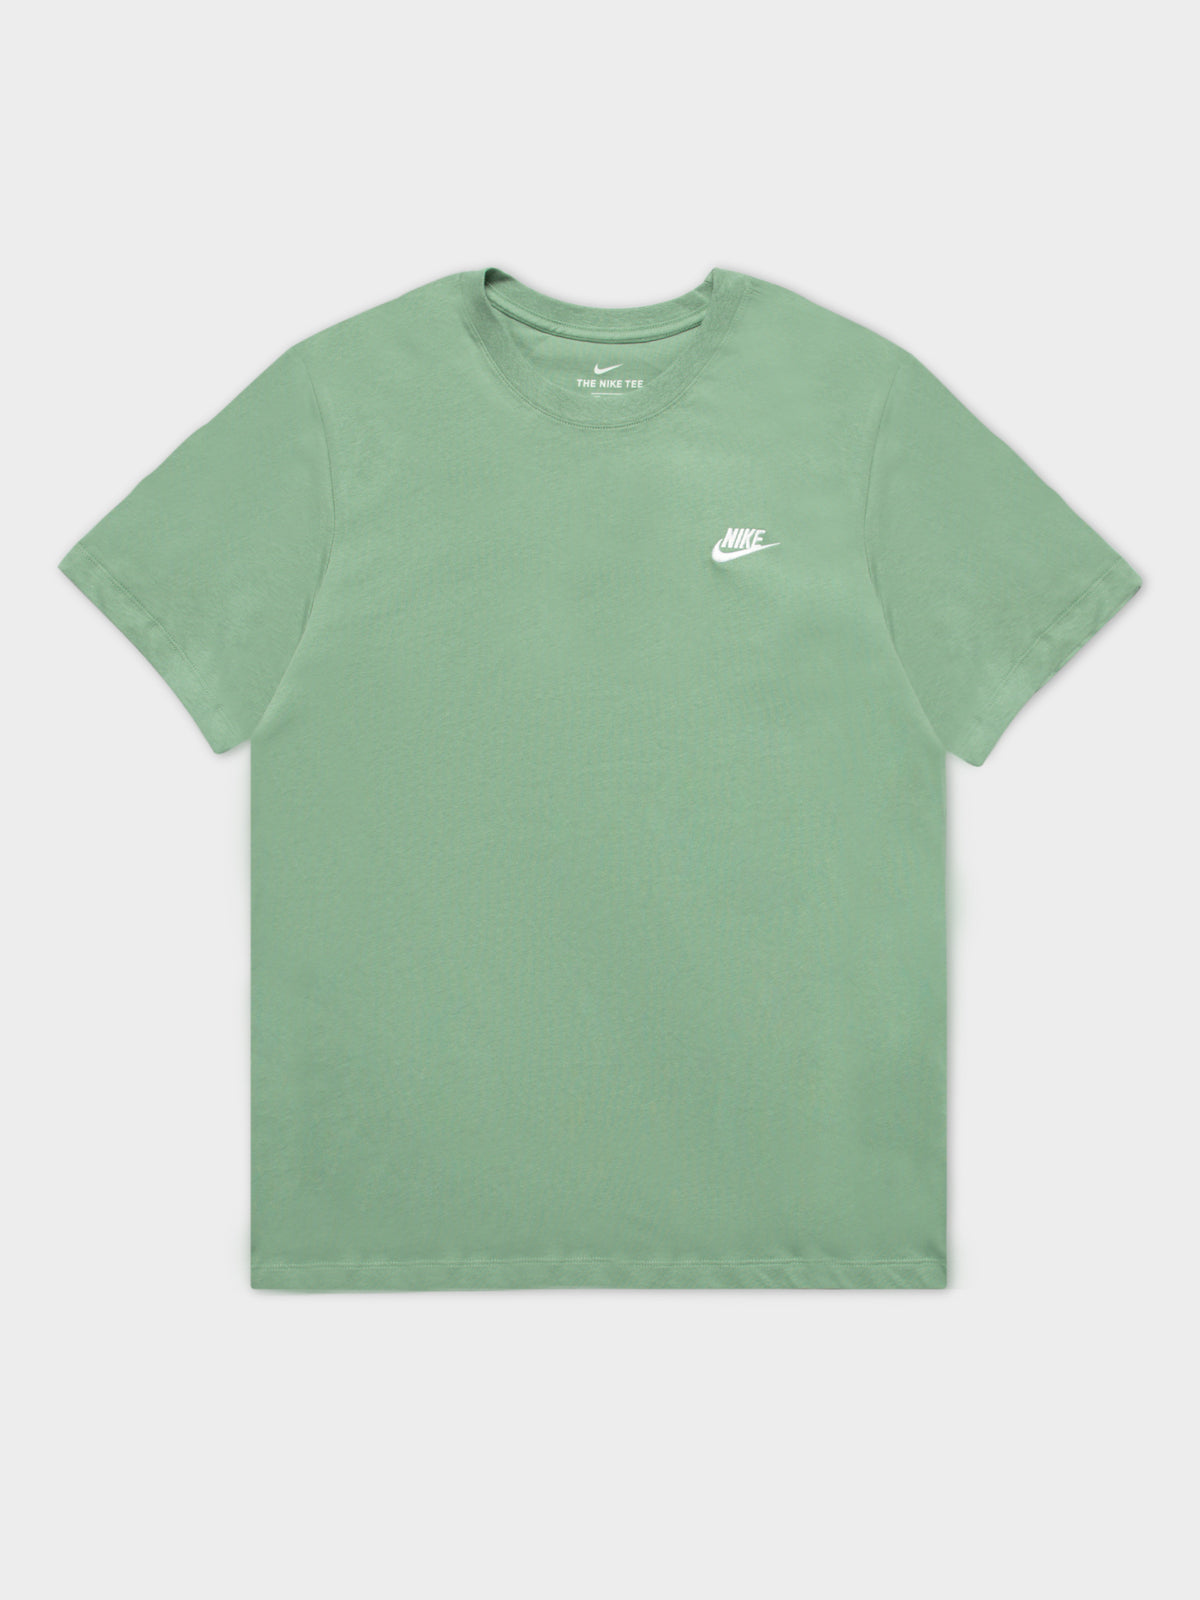 NSW Club T-Shirt in Green &amp; White